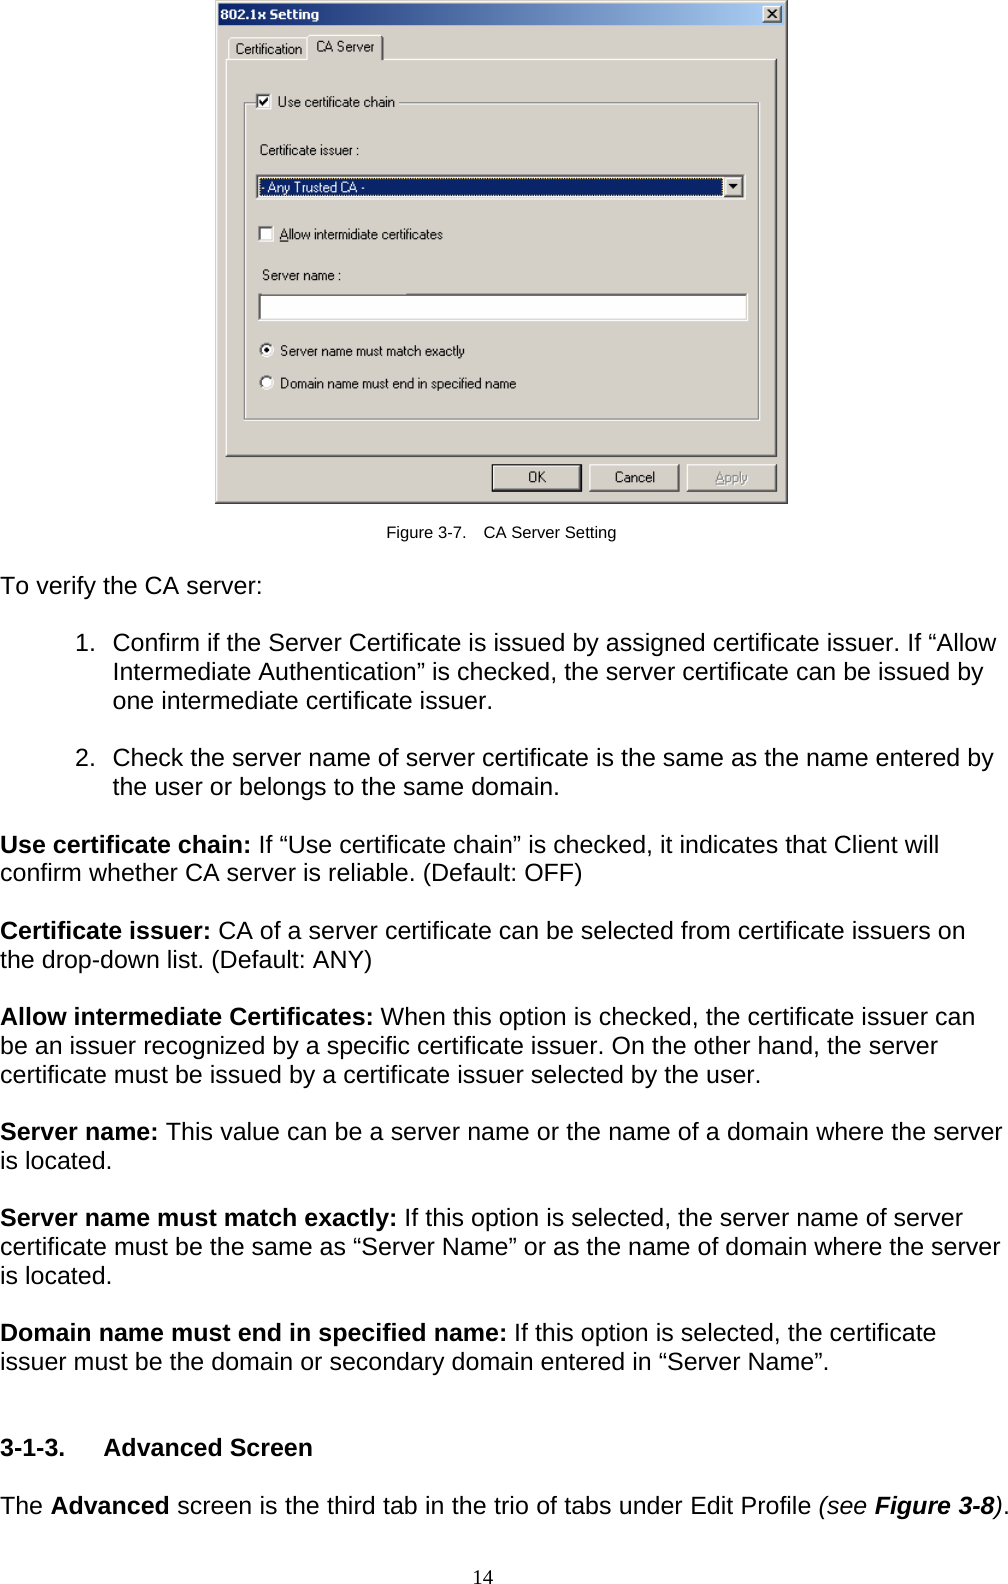 14     Figure 3-7.    CA Server Setting  To verify the CA server:  1.  Confirm if the Server Certificate is issued by assigned certificate issuer. If “Allow Intermediate Authentication” is checked, the server certificate can be issued by one intermediate certificate issuer.  2.  Check the server name of server certificate is the same as the name entered by the user or belongs to the same domain.  Use certificate chain: If “Use certificate chain” is checked, it indicates that Client will confirm whether CA server is reliable. (Default: OFF)  Certificate issuer: CA of a server certificate can be selected from certificate issuers on the drop-down list. (Default: ANY)  Allow intermediate Certificates: When this option is checked, the certificate issuer can be an issuer recognized by a specific certificate issuer. On the other hand, the server certificate must be issued by a certificate issuer selected by the user.  Server name: This value can be a server name or the name of a domain where the server is located.  Server name must match exactly: If this option is selected, the server name of server certificate must be the same as “Server Name” or as the name of domain where the server is located.  Domain name must end in specified name: If this option is selected, the certificate issuer must be the domain or secondary domain entered in “Server Name”.   3-1-3. Advanced Screen  The Advanced screen is the third tab in the trio of tabs under Edit Profile (see Figure 3-8). 